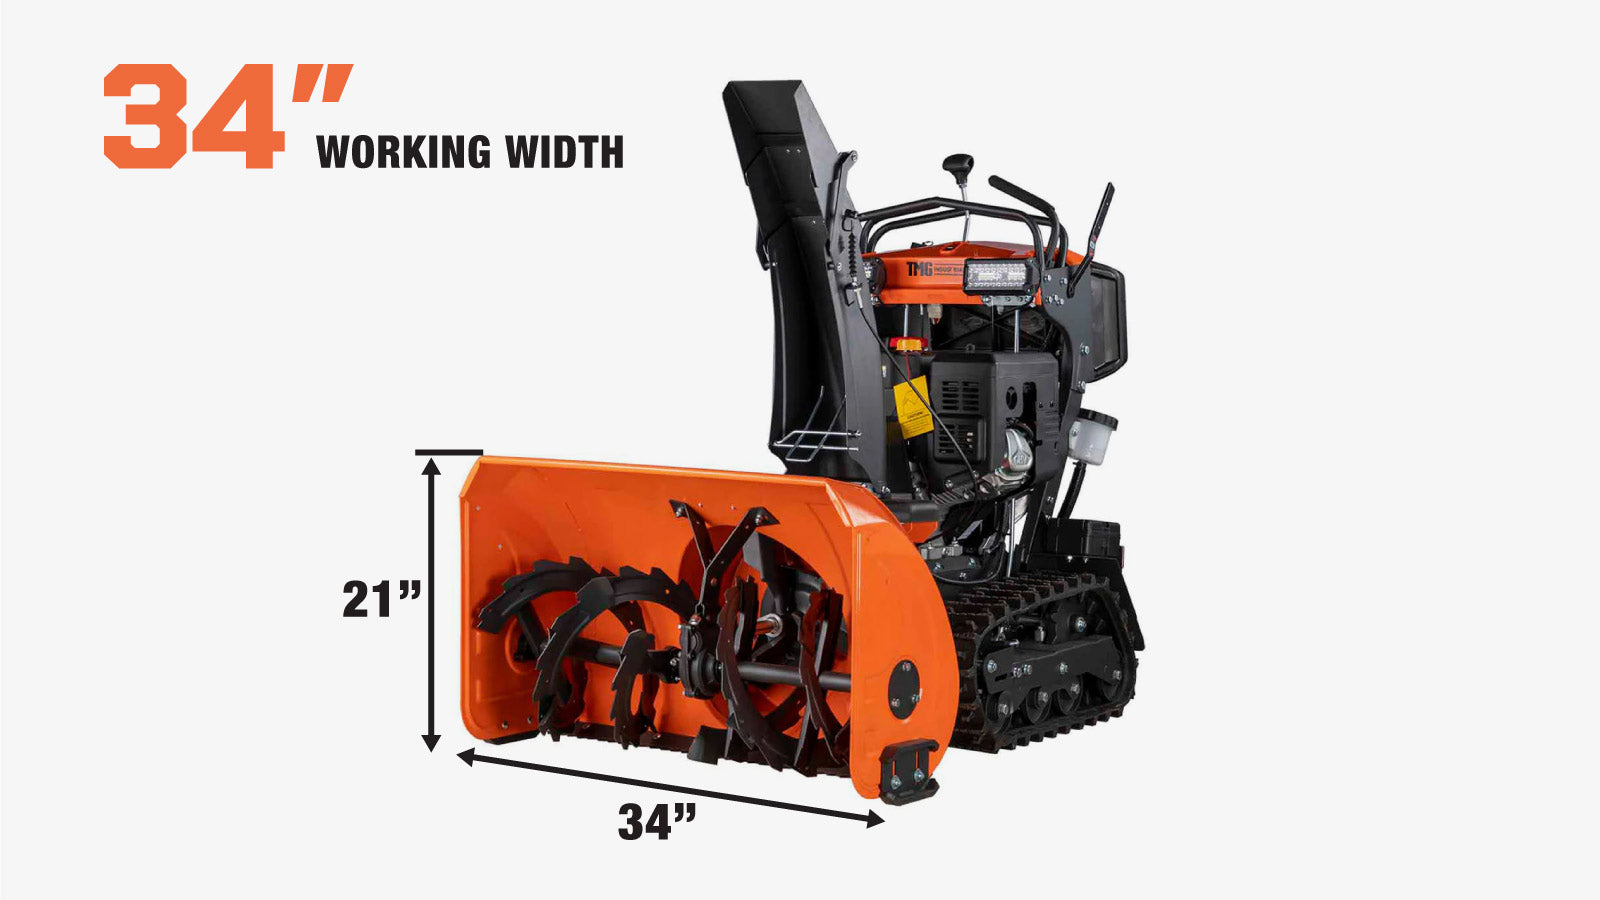 TMG Industrial 34” Stand-On Gas-Powered Snow Blower, Dual Stage, Rubber Track, LED Light, 50’ Throwing Distance, TMG-GSB36-specifications-image